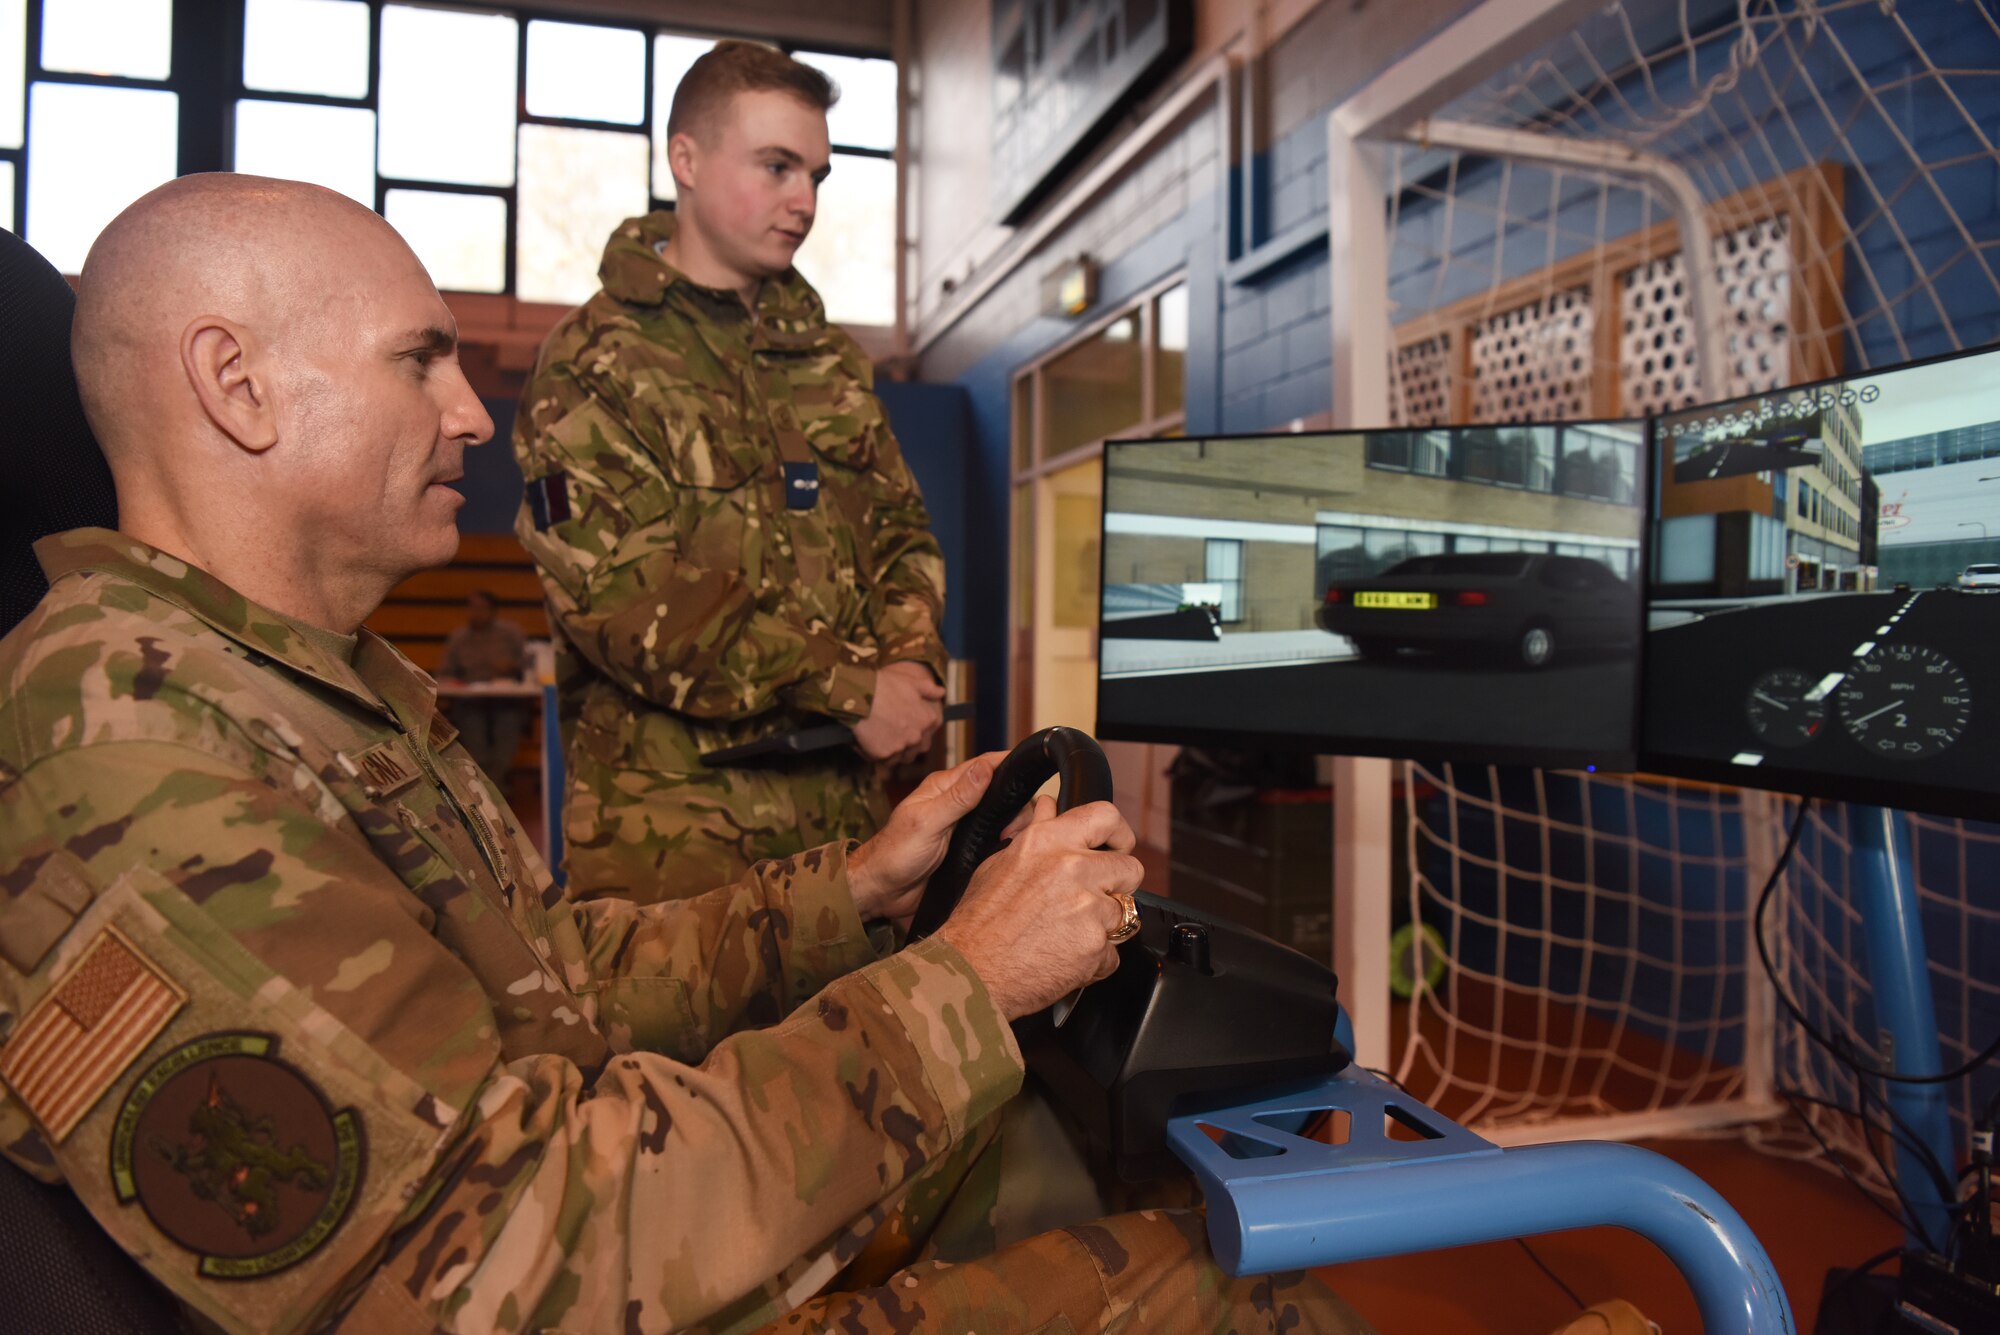 Major Anthony Lamagna, 100th Logistics Readiness Squadron commander, operates a road safety simulator during a Road Safety Day event at RAF Mildenhall, England, Nov. 21, 2019. UK Road Safety Week runs Nov. 18 – 24 and aims to inspire people in the UK to take action on road safety and promote life-saving messages. (U.S. Air Force photo by Senior Airman Brandon Esau)